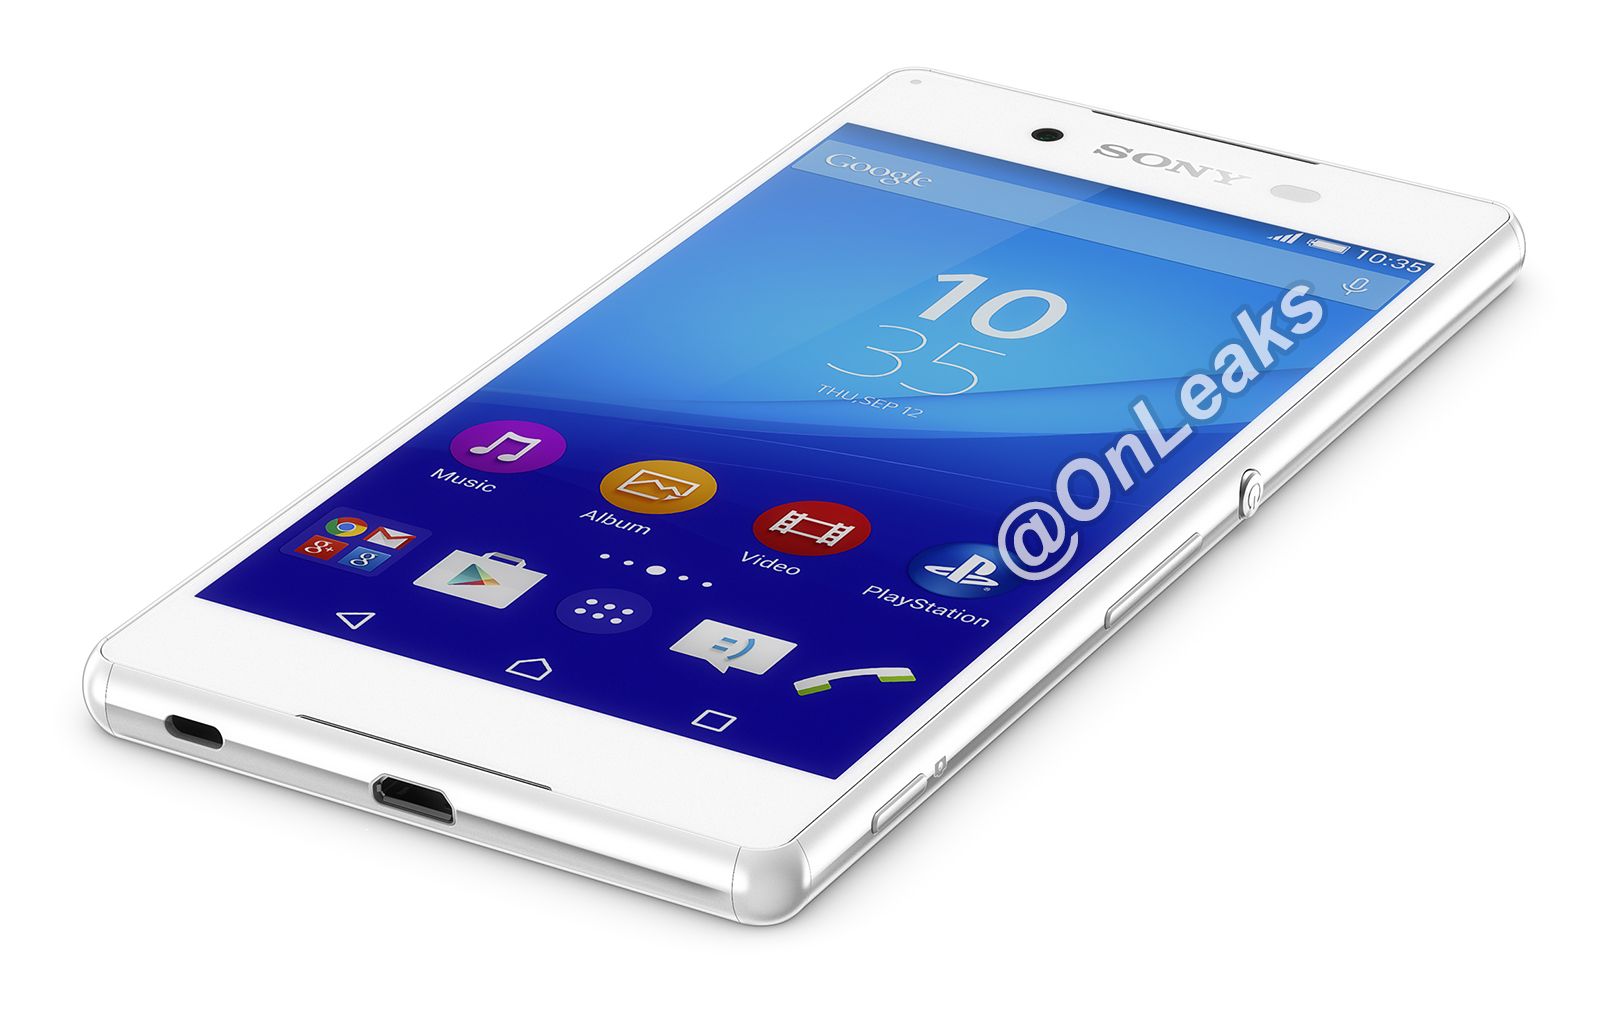 sony xperia z4 pictures reveal what sony s next flagship will look like image 1